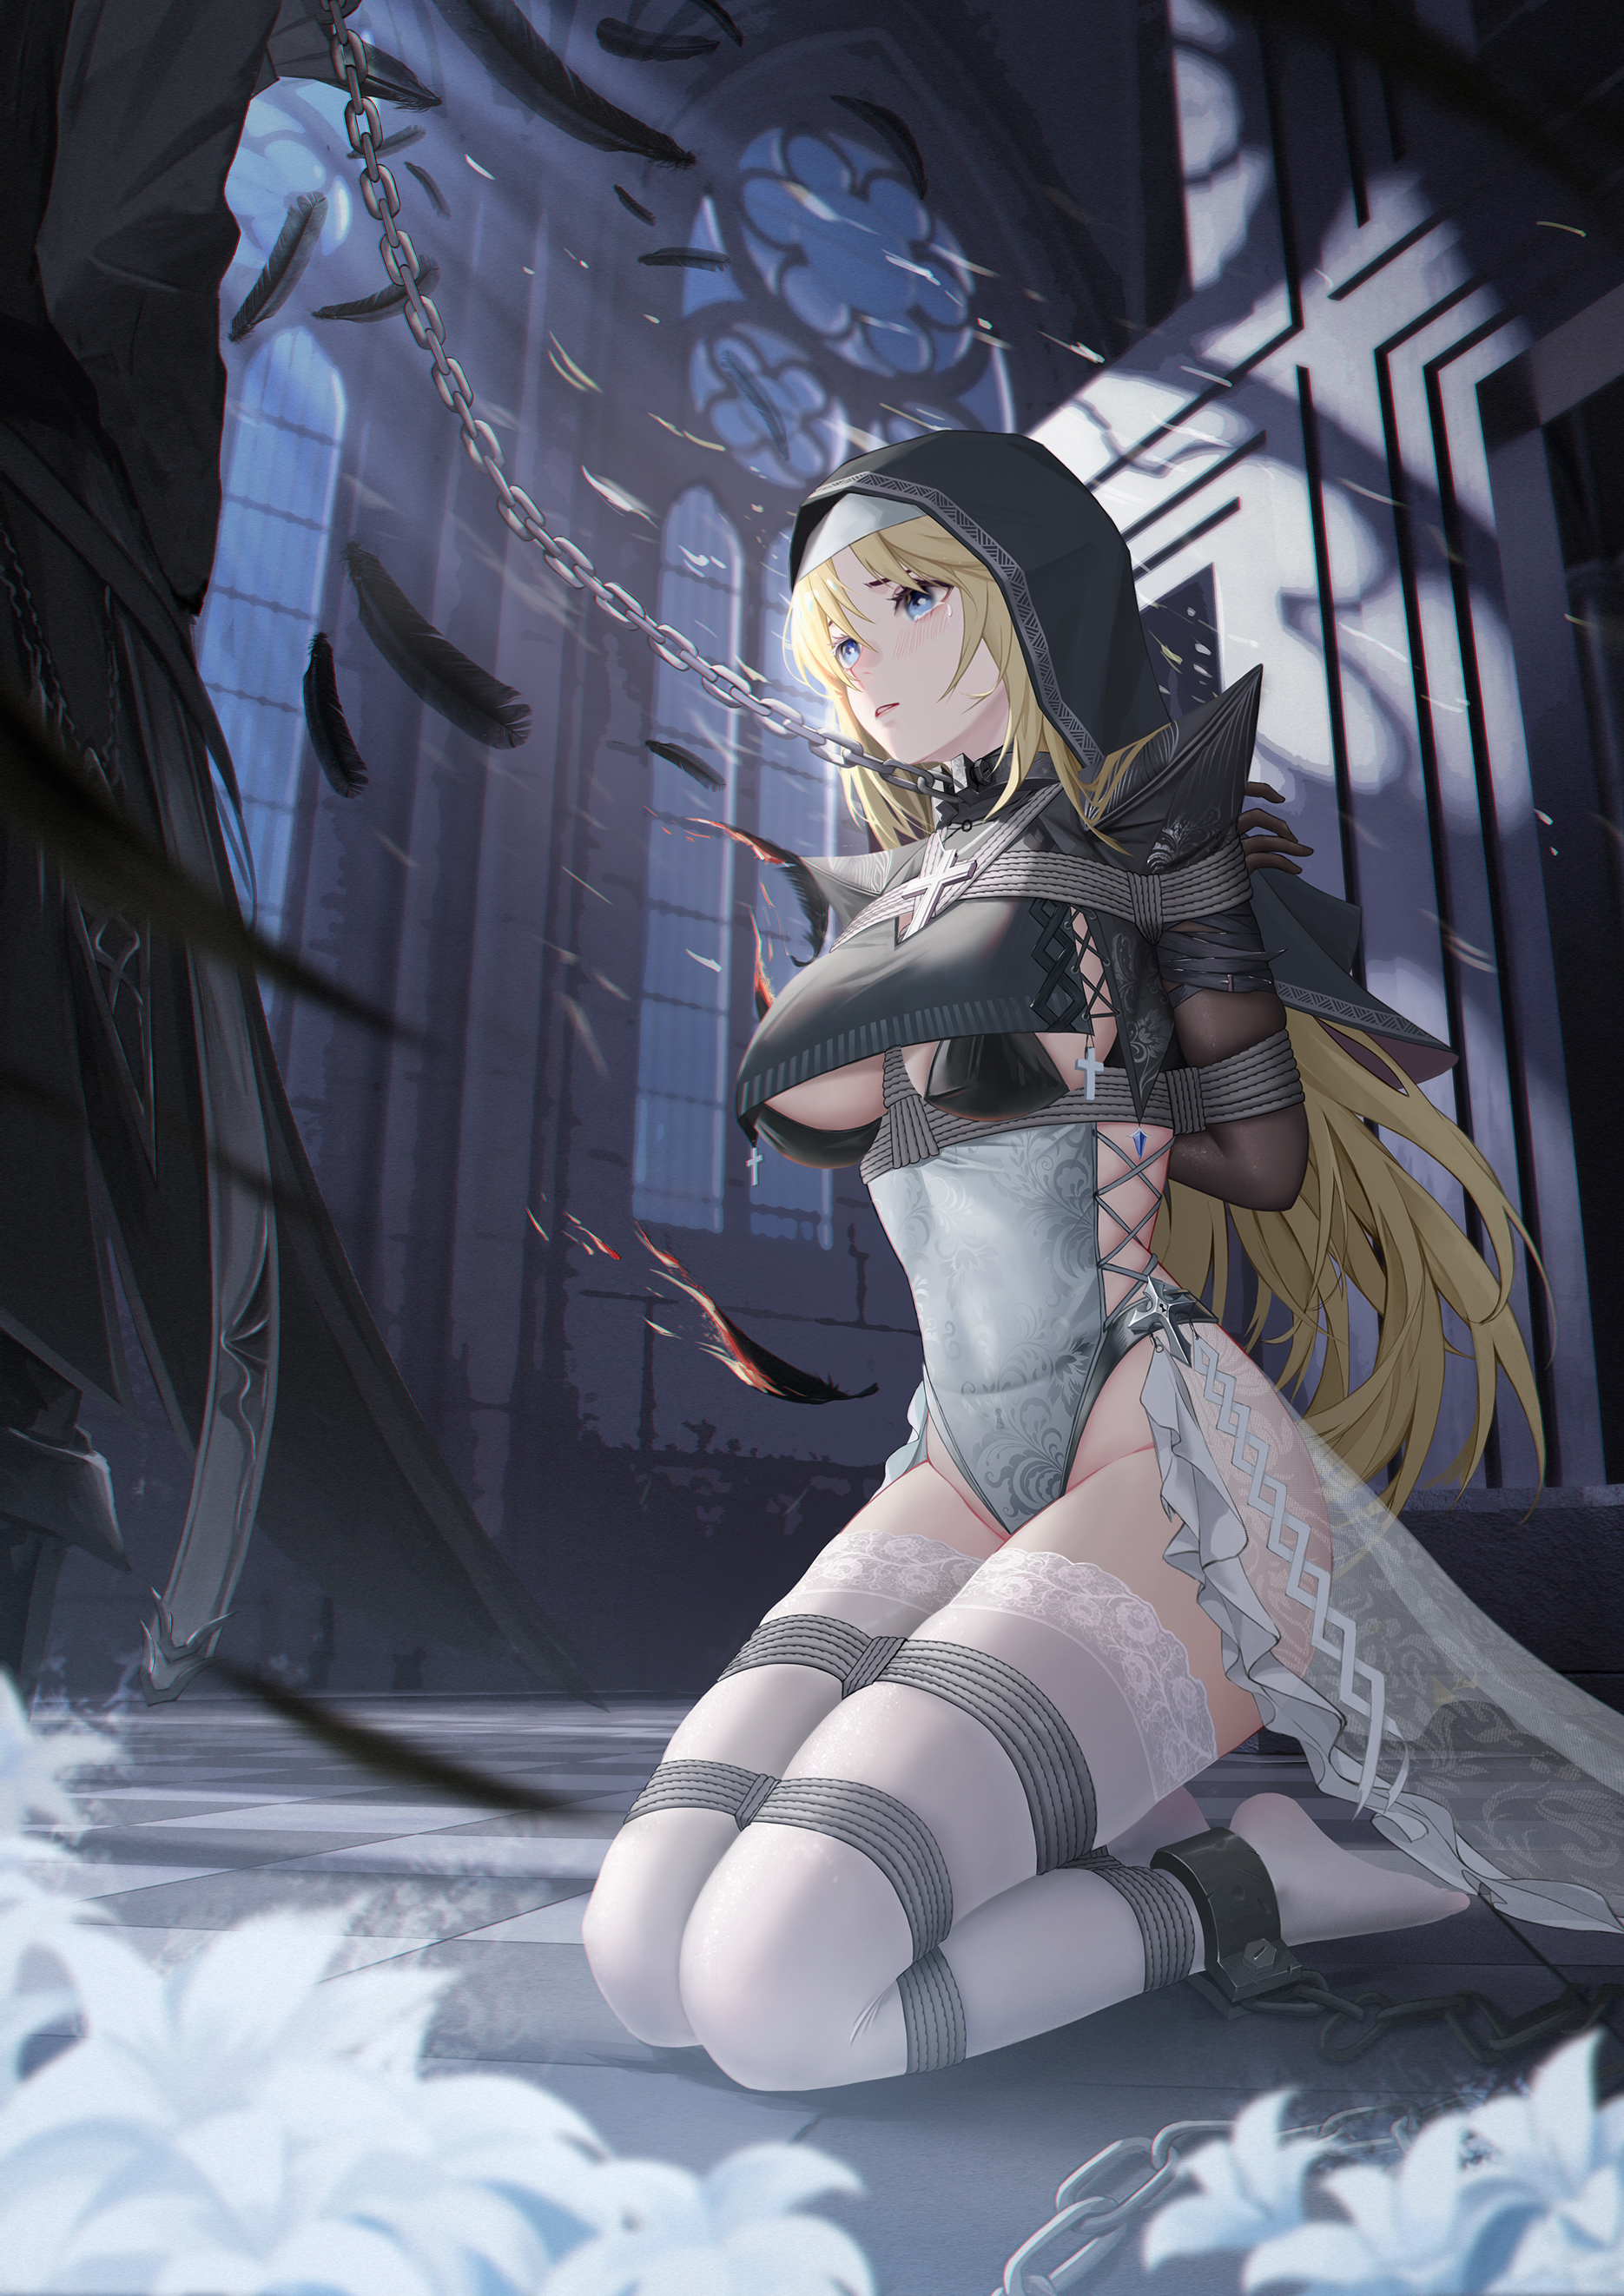 Anime 1870x2644 anime anime girls chains squatting BDSM stockings blonde blue eyes tears feathers nun outfit